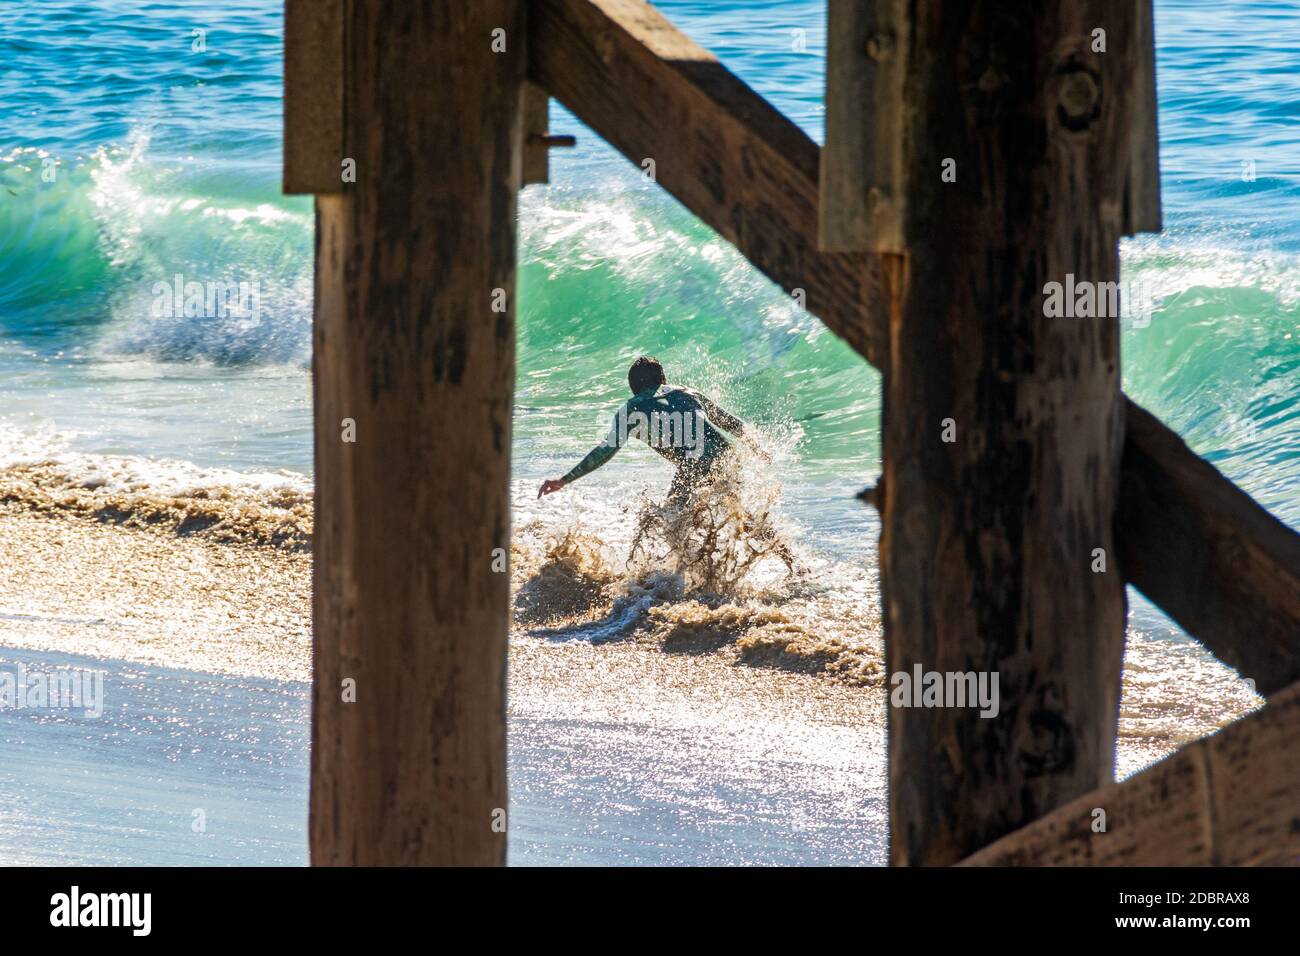 Young man in wetsuit skimboards near the Balboa Pier during the King Tide. Stock Photo